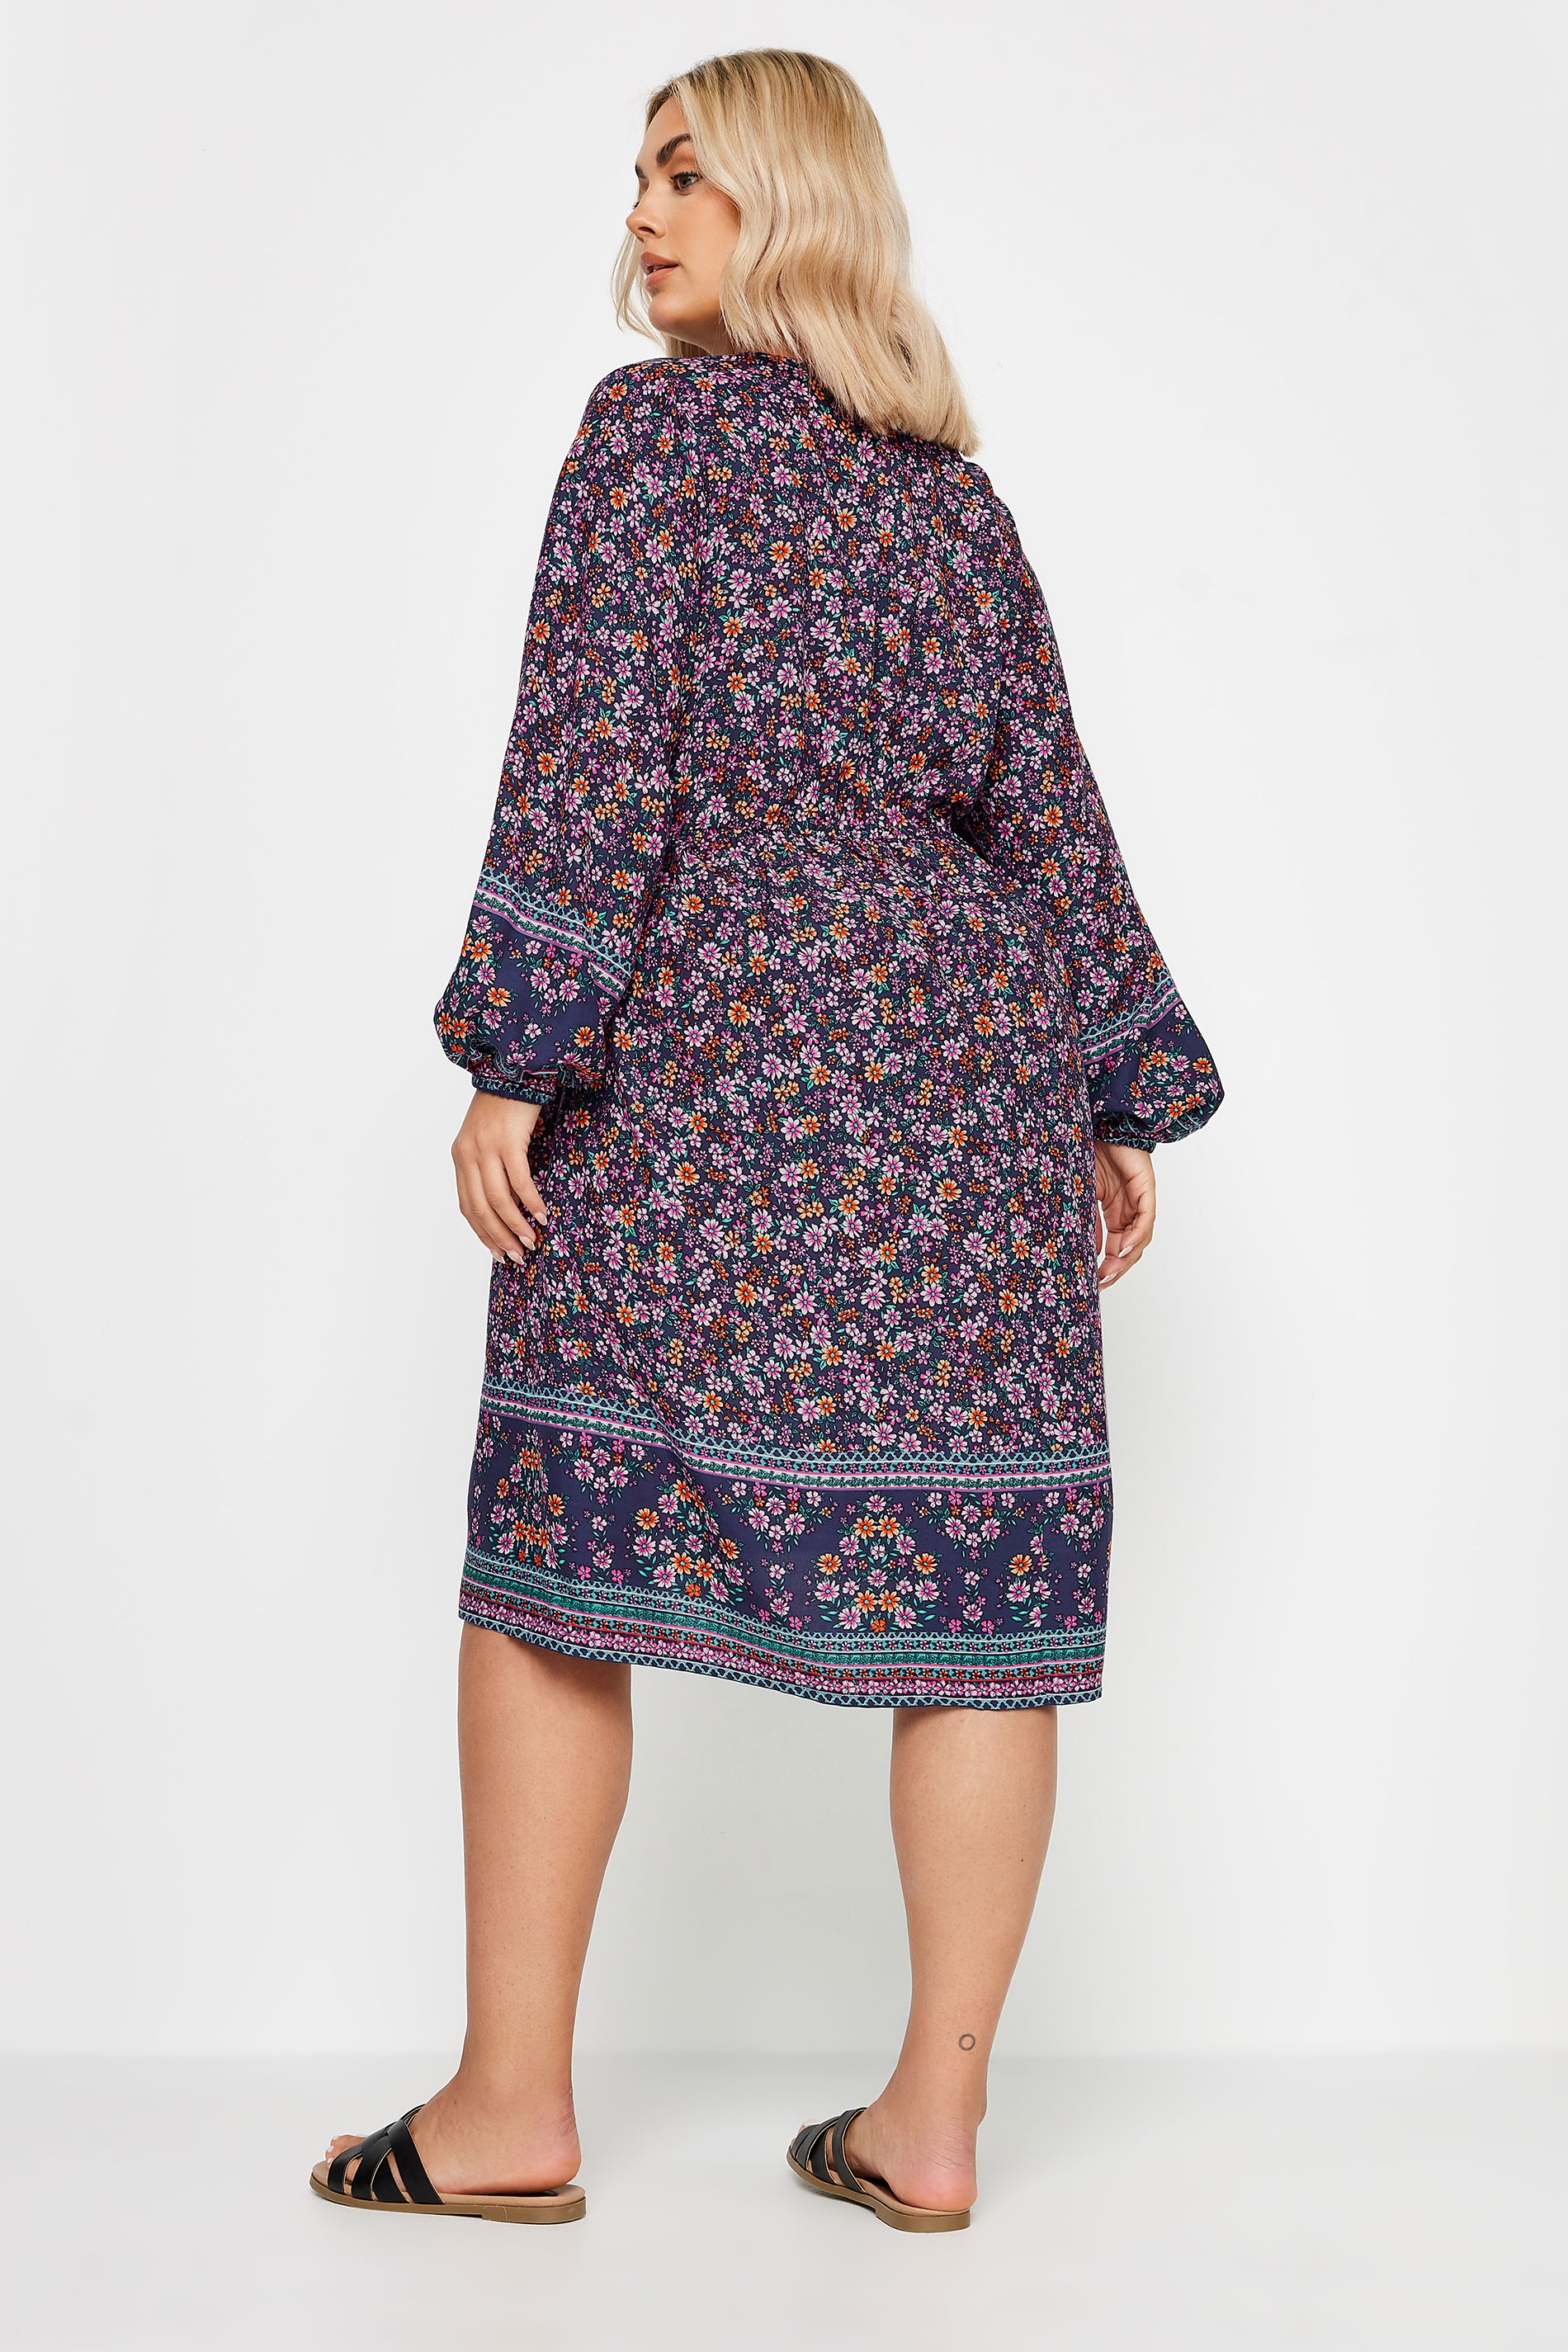 YOURS Plus Size Navy Blue Floral Print Smock Dress | Yours Clothing 3